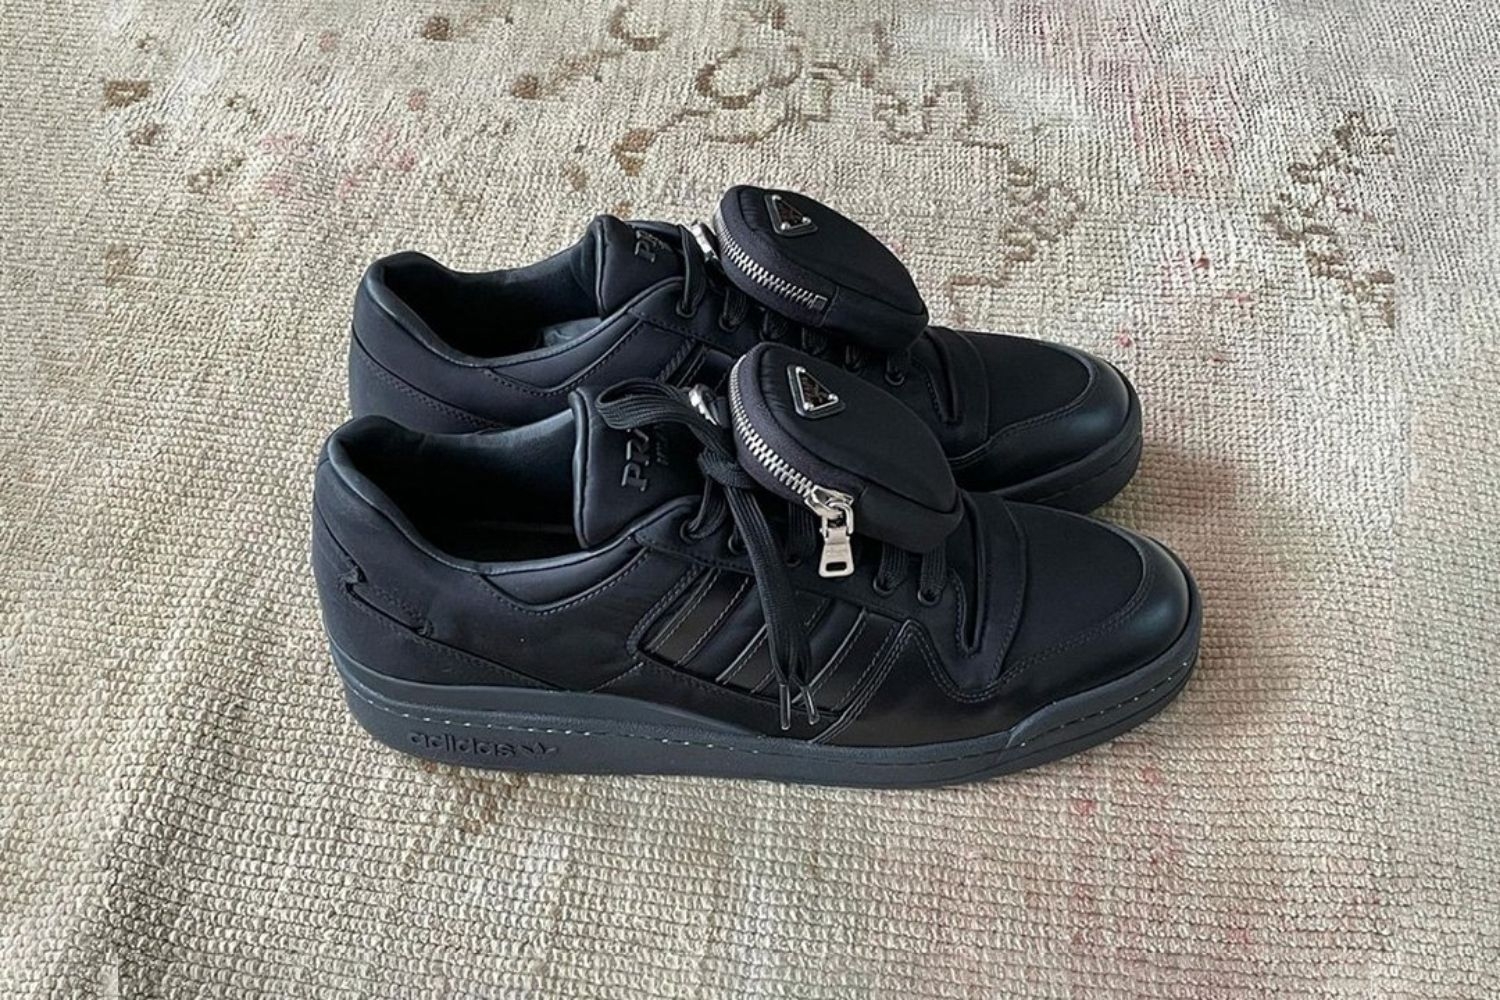 Check out the first images of the PRADA x adidas Forum Low 'Triple Black' here